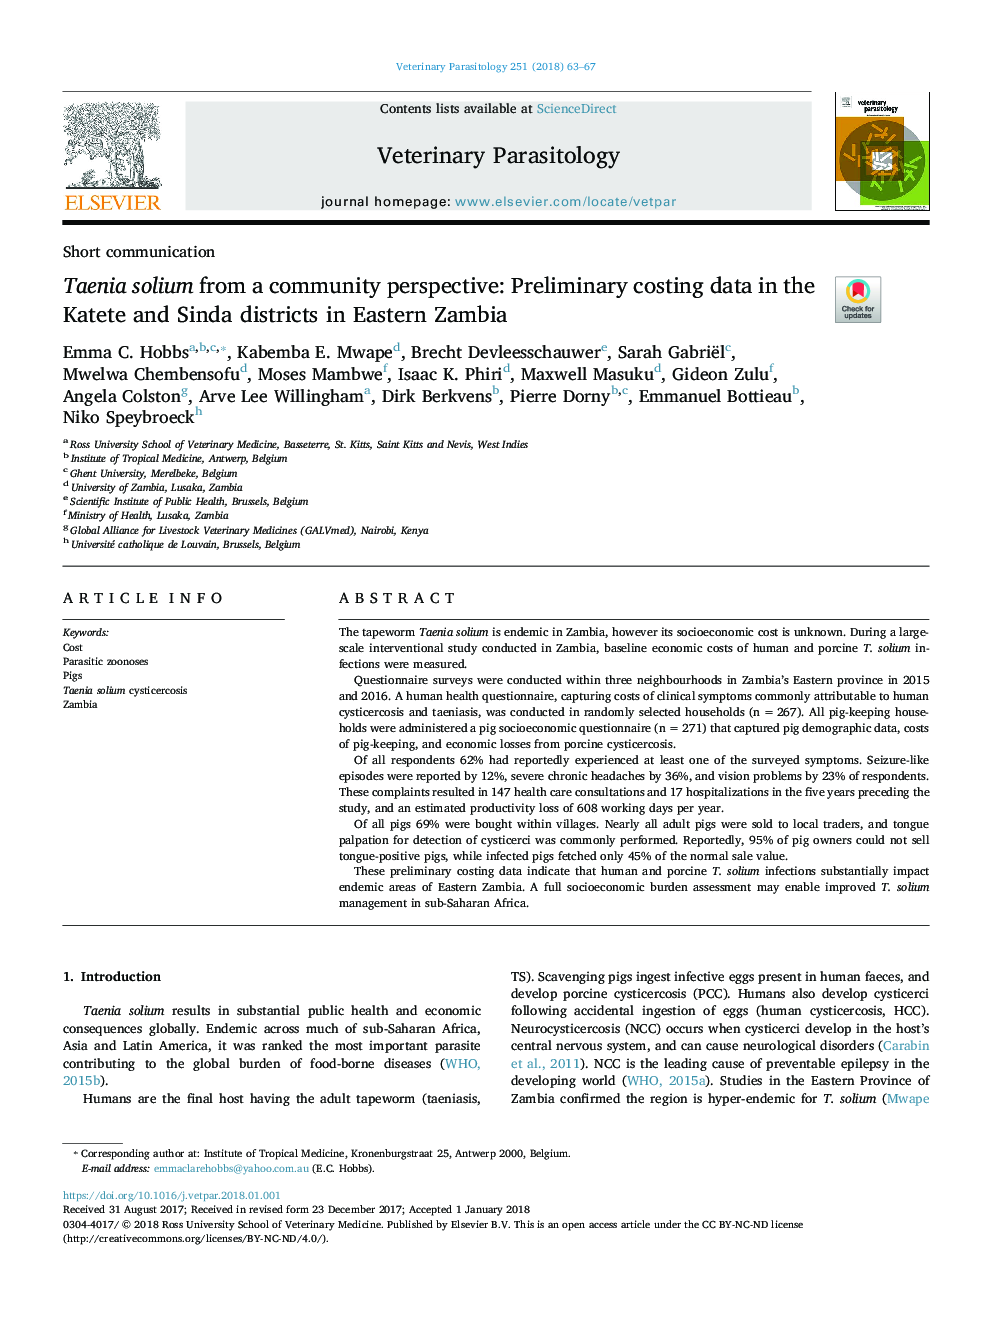 Taenia solium from a community perspective: Preliminary costing data in the Katete and Sinda districts in Eastern Zambia